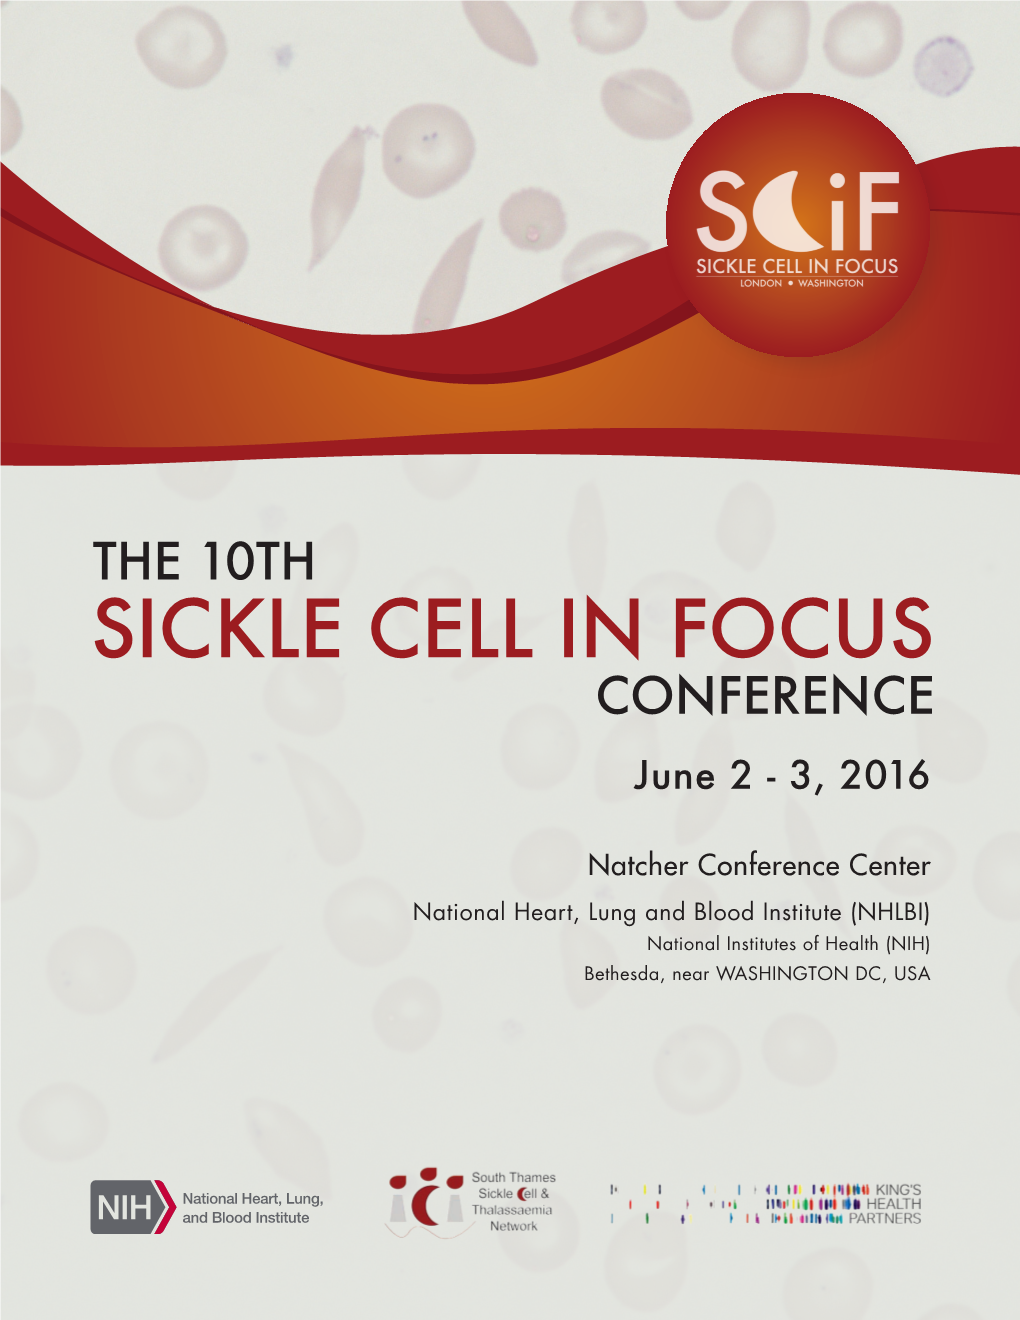 SICKLE CELL in FOCUS CONFERENCE June 2 - 3, 2016